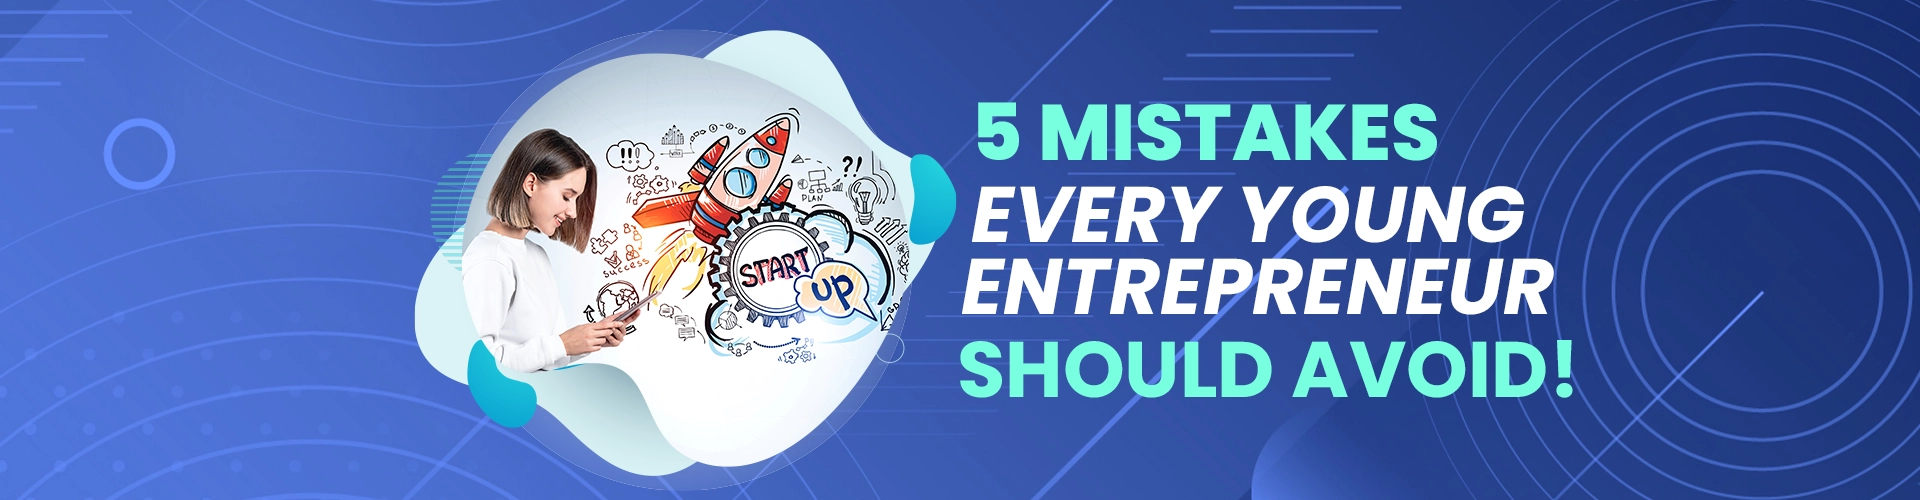 Top 5 Mistakes Every Young Entrepreneur Should Avoid